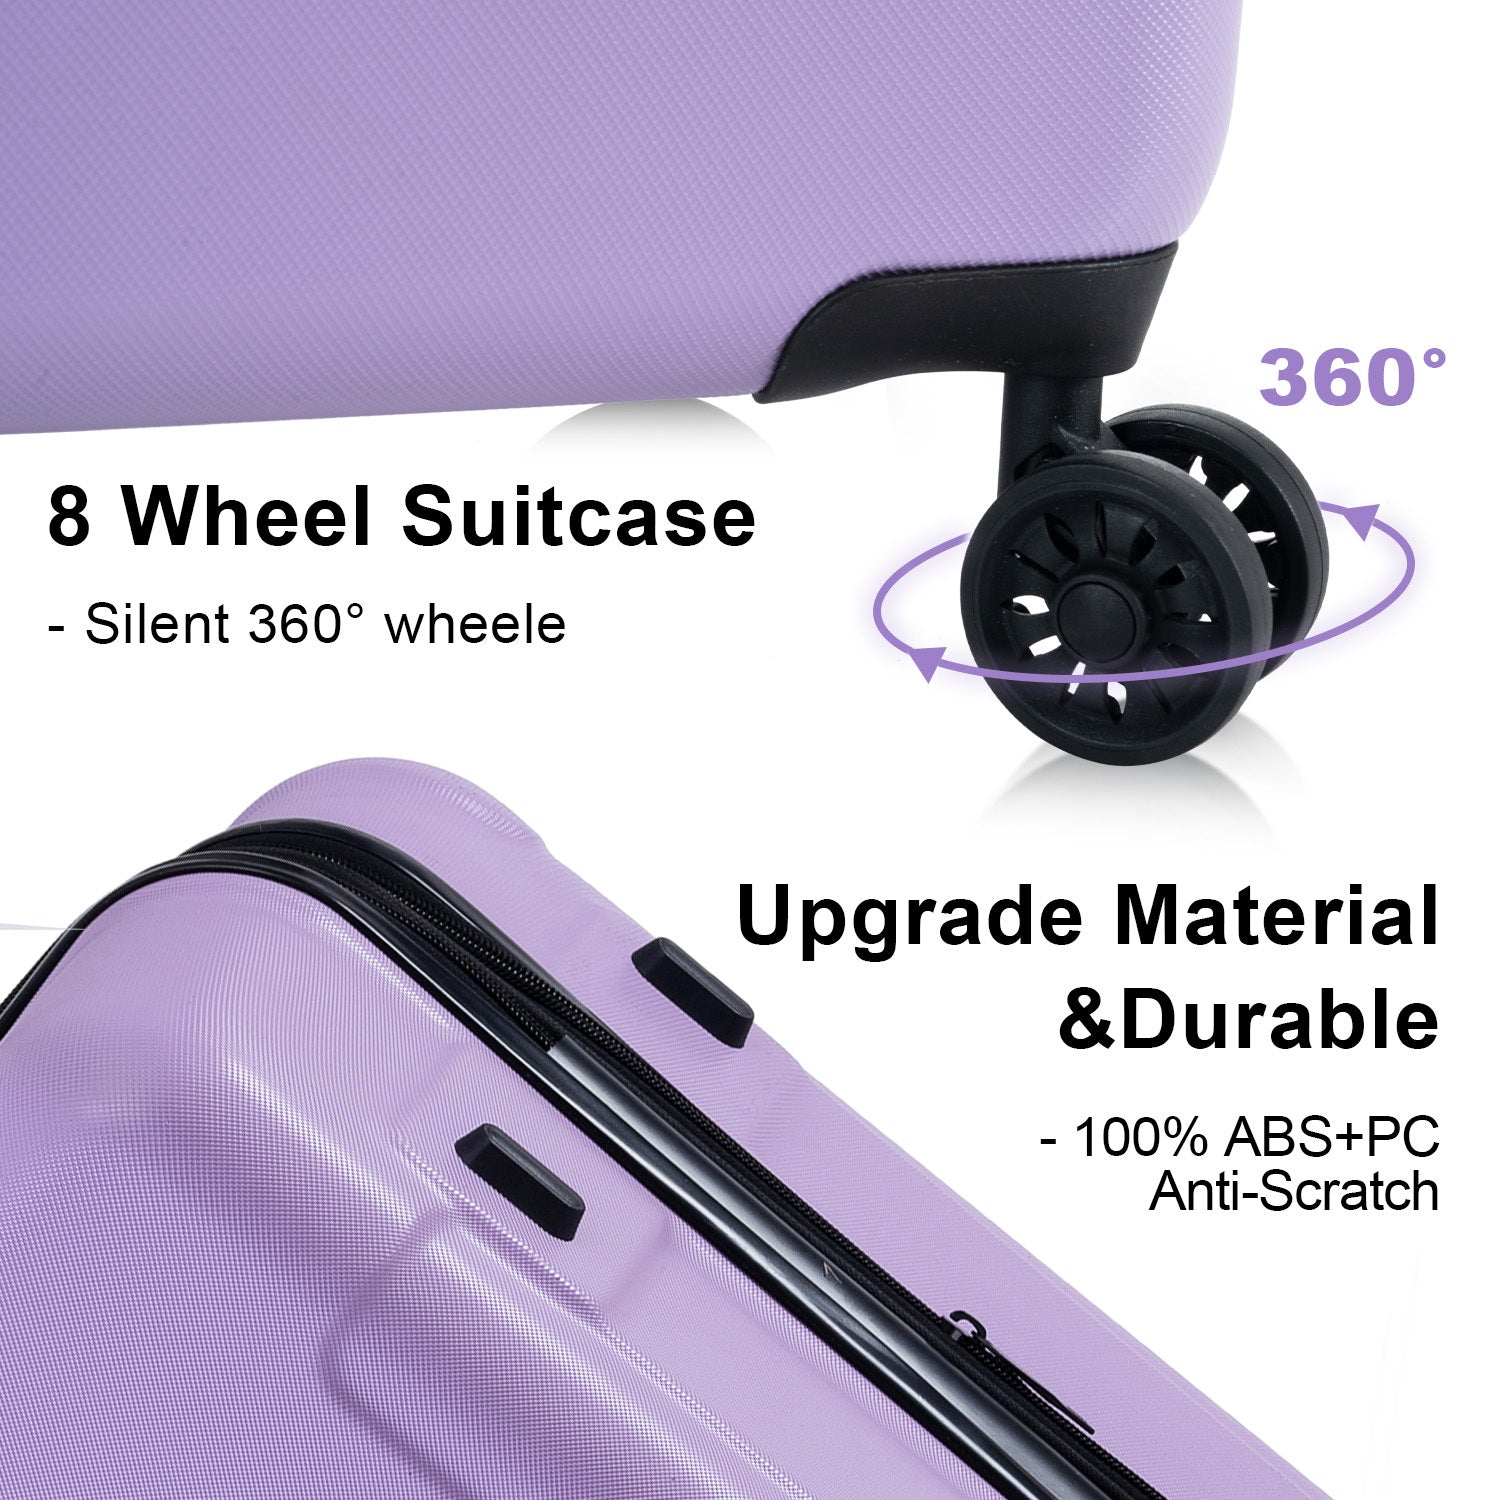 Luggage Sets Model Expandable ABS PC 3 Piece Sets with light purple-abs+pc